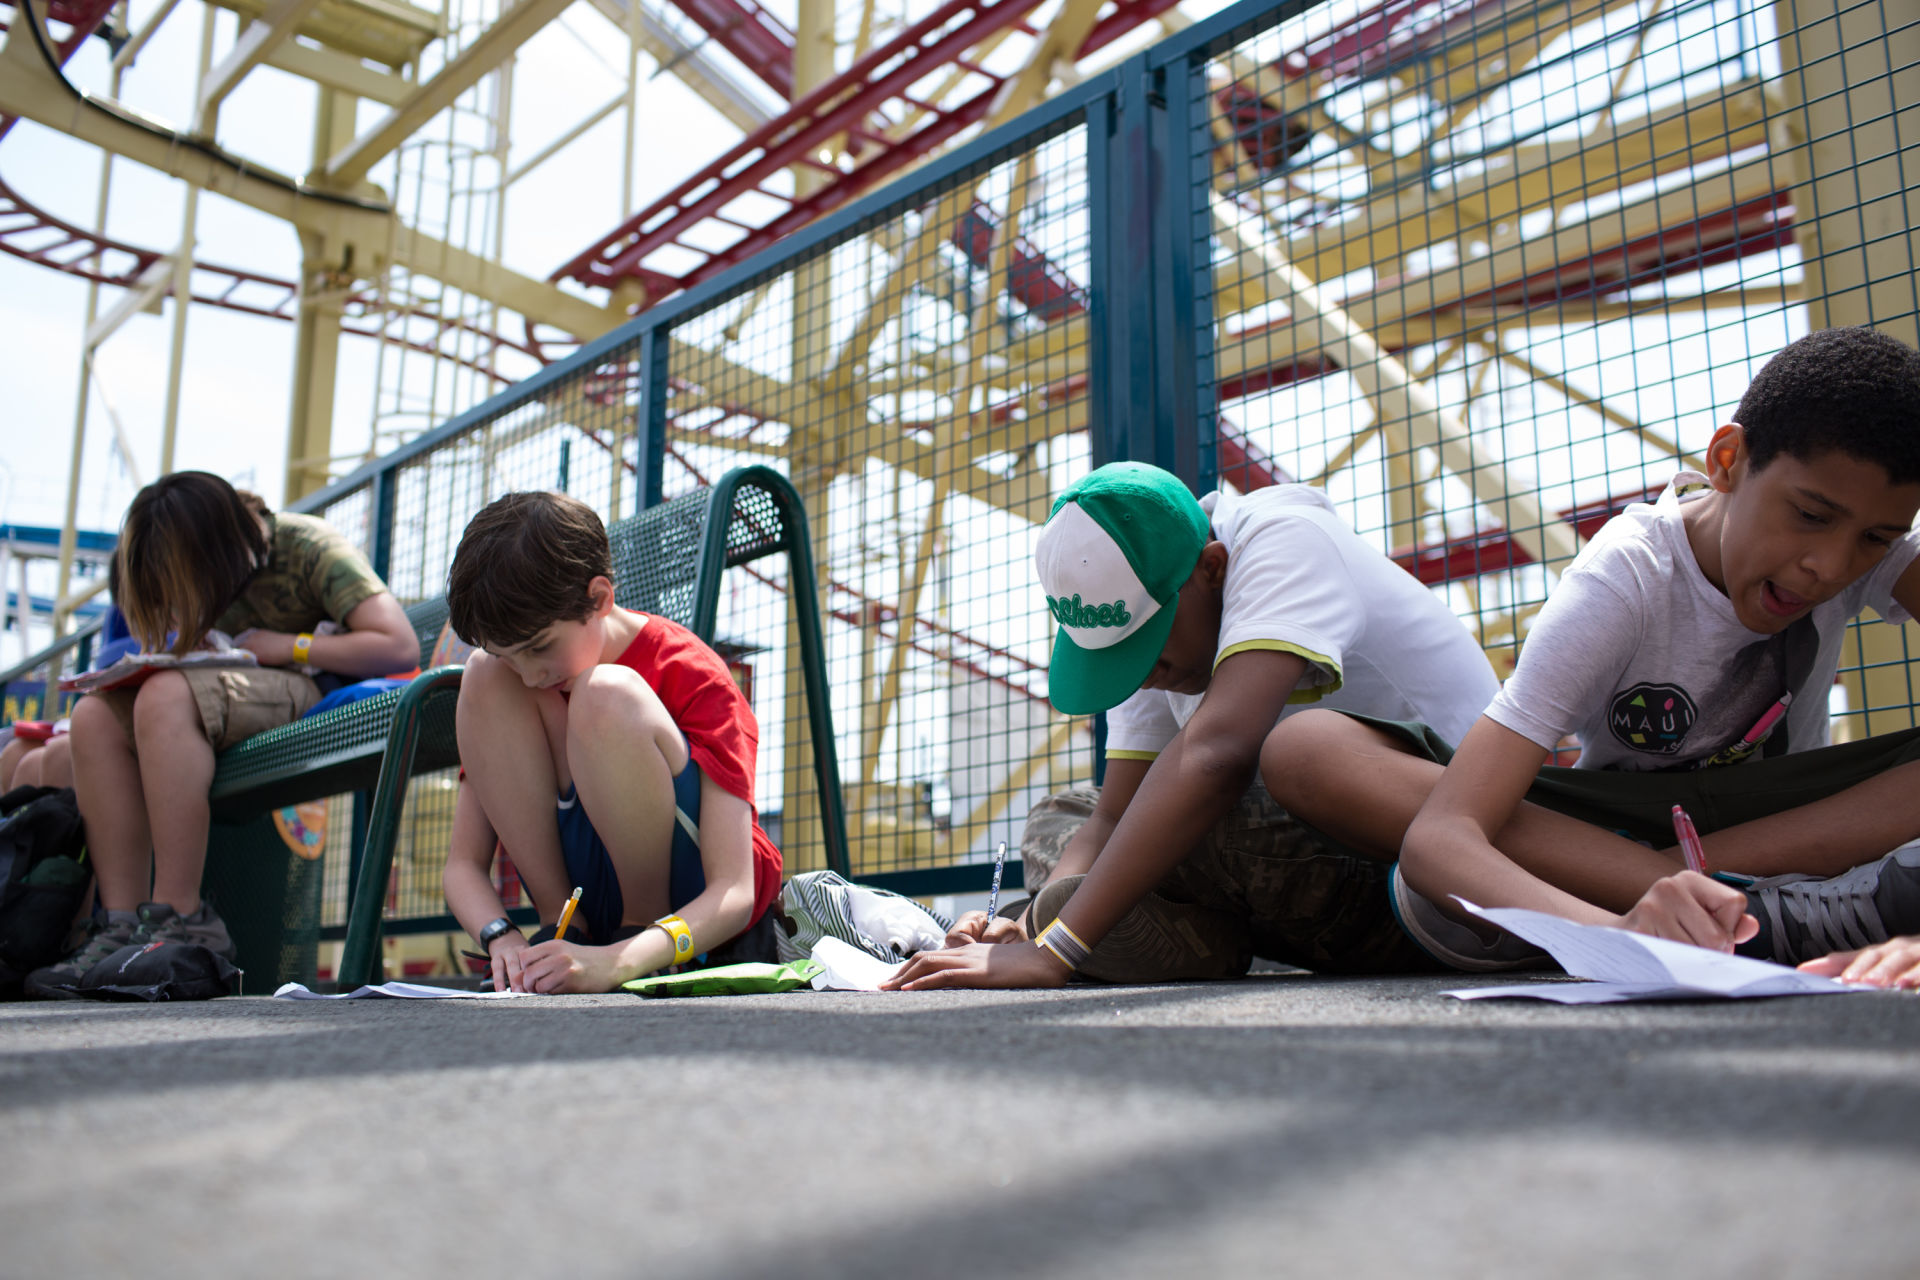 Thea Jones, 12, at left, Etai Kurtzman, 12, Seth Samuel, 12 and Terrell Gantt, 12, fill out game analysis worksheets at Coney Island in Brooklyn, NY May 28, 2015. The group of students from Quest to Learn School took the day trip to Coney Island to analyze user experience on games and rides at Luna Park as part of  their late-spring school curriculum. 